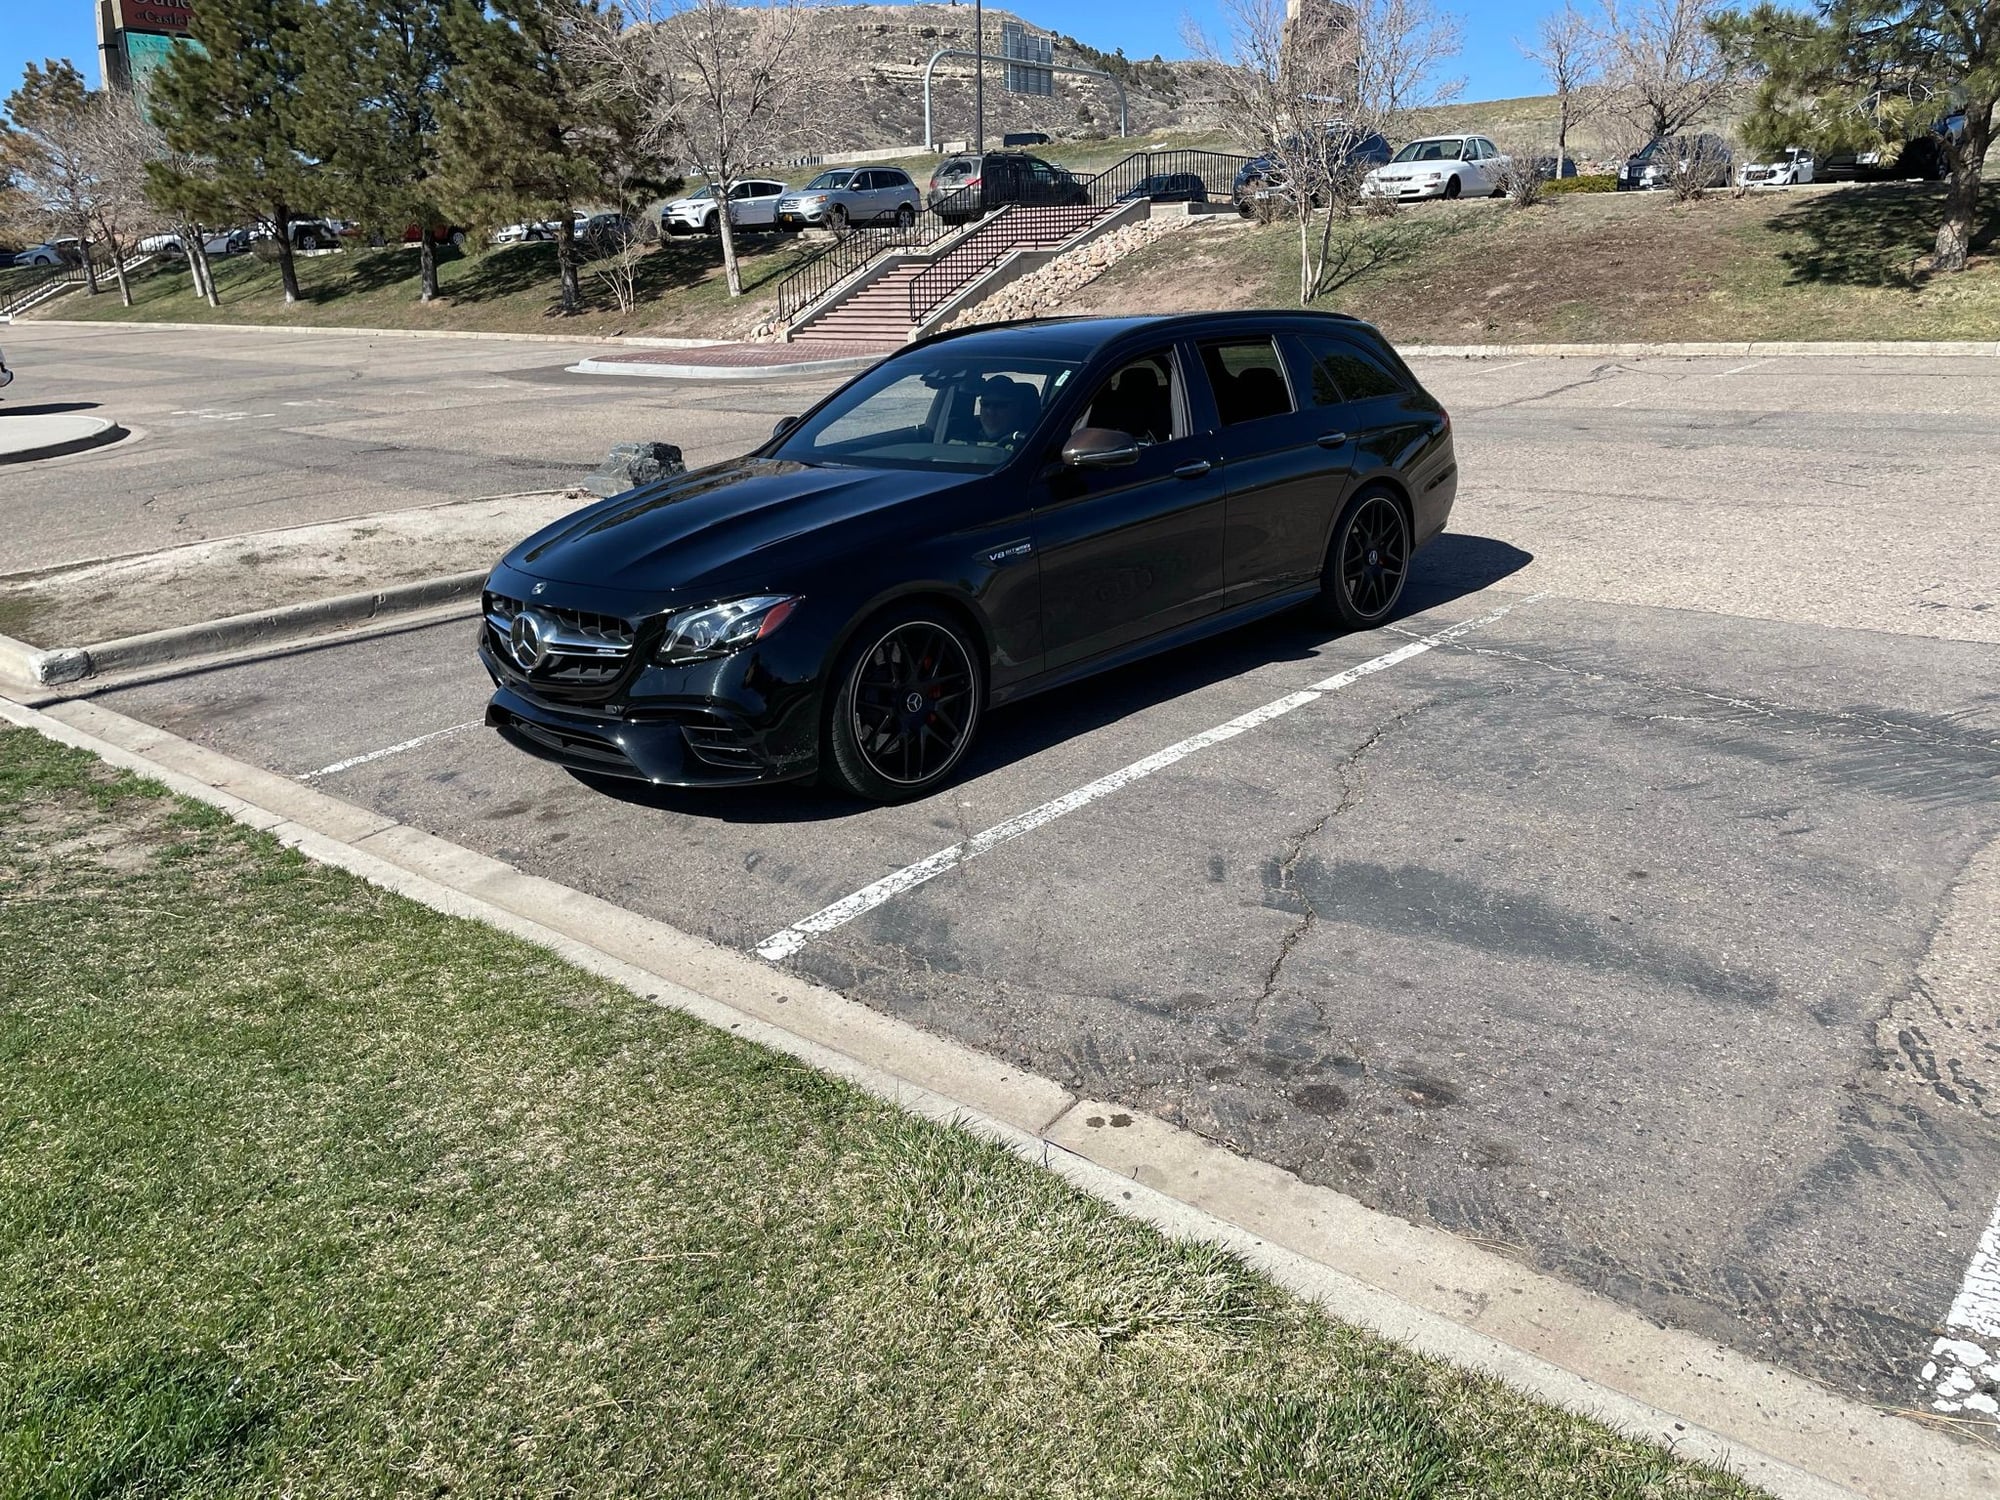 2018 Mercedes-Benz E63 AMG S - E63s Wagon - Fully Loaded - Used - VIN WDDZH8KB0JA373568 - 46,551 Miles - 8 cyl - AWD - Automatic - Wagon - Black - Denver, CO 80204, United States